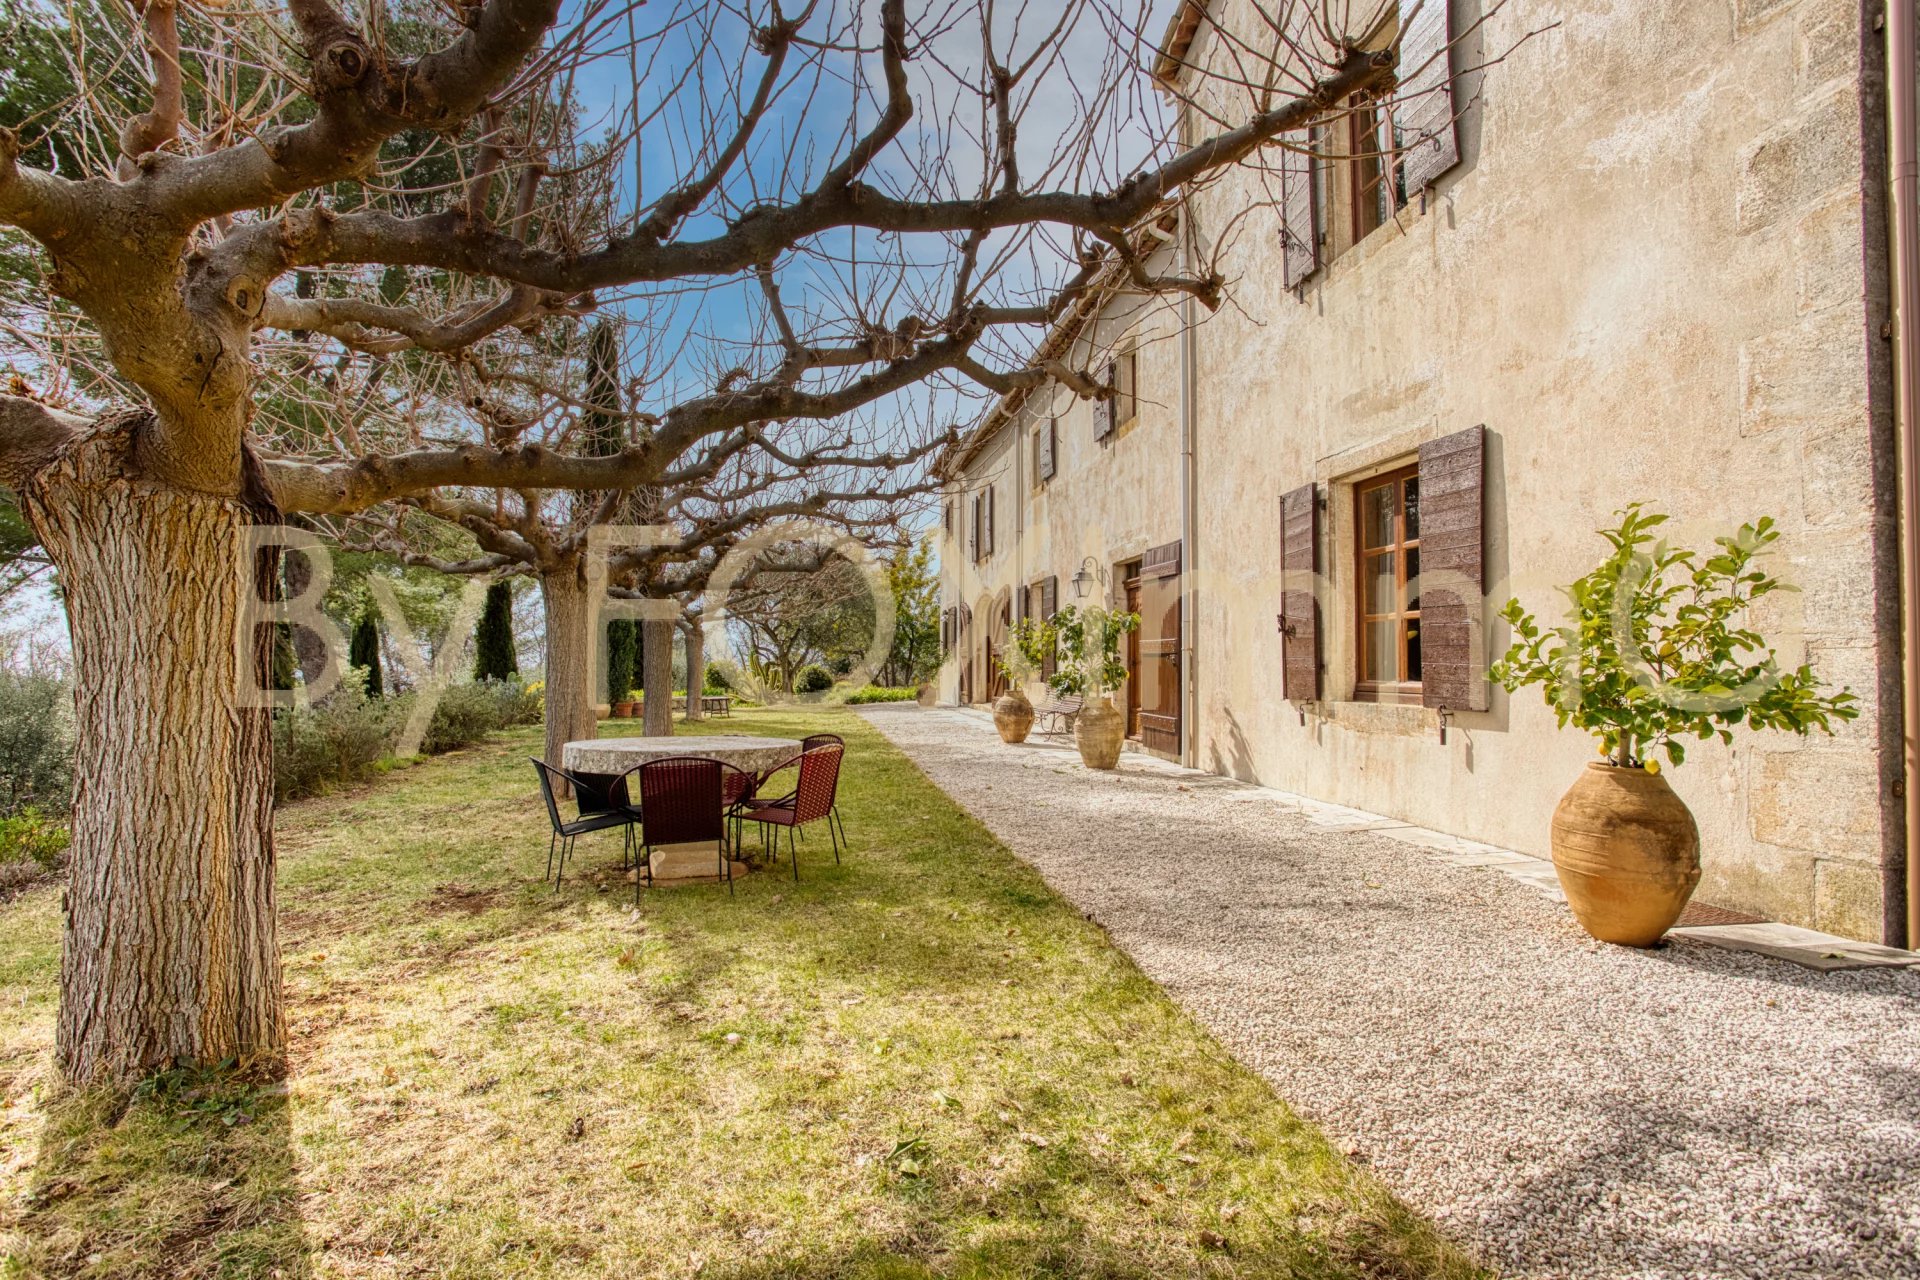 Côte d'Azur, near Grasse and Cannes, magnificent villa, Bastide in absolute peace and quiet, dominant position, panoramic view, swimming pool, grounds with olive trees